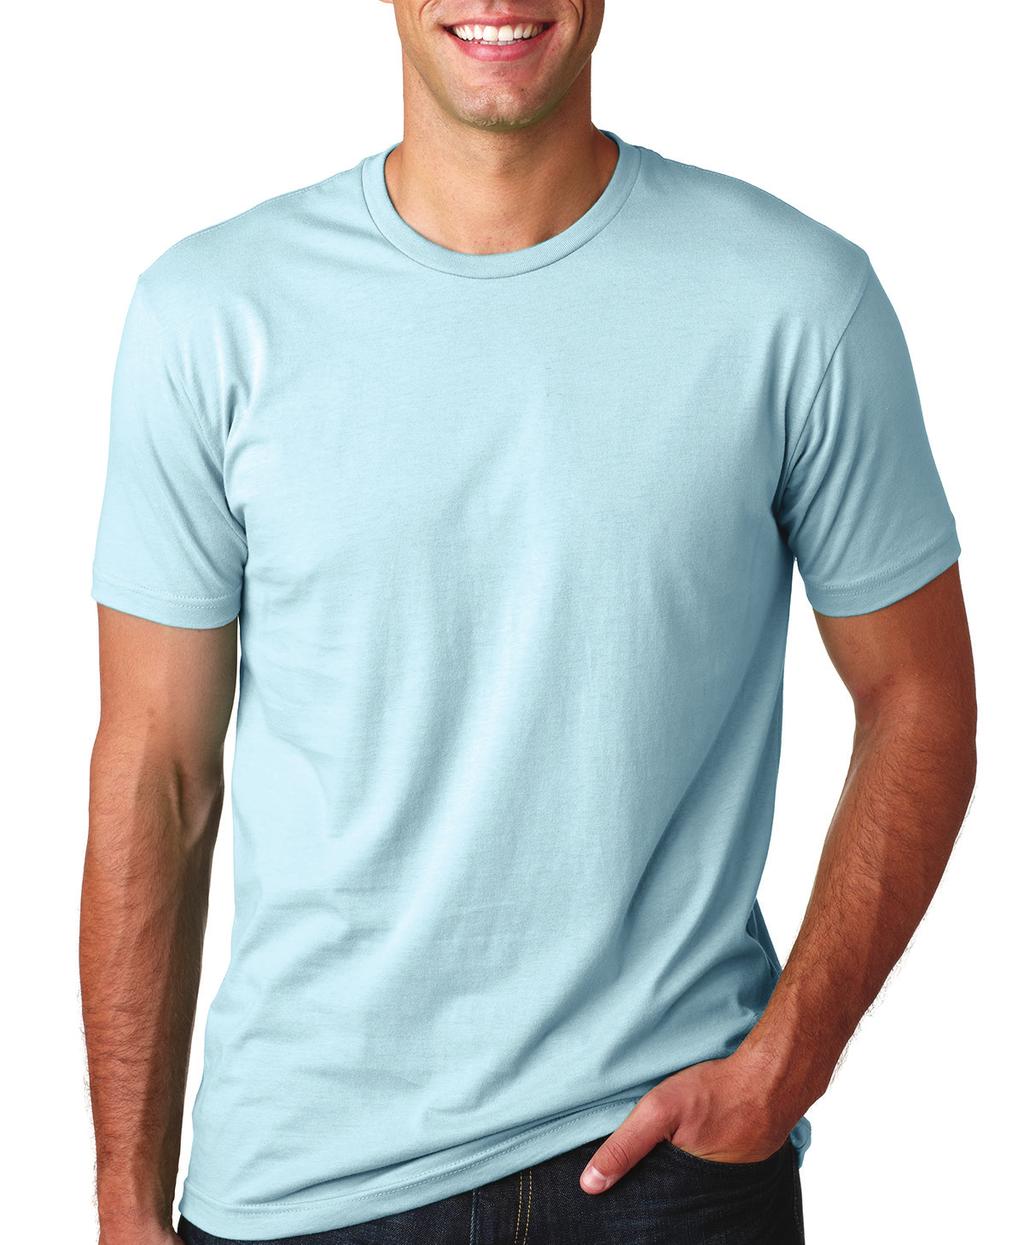 PRODUCT SELL SHEET 3600 Next Level Men s Premium Fitted Short-Sleeve Crew MSRP (A): CALL FOR